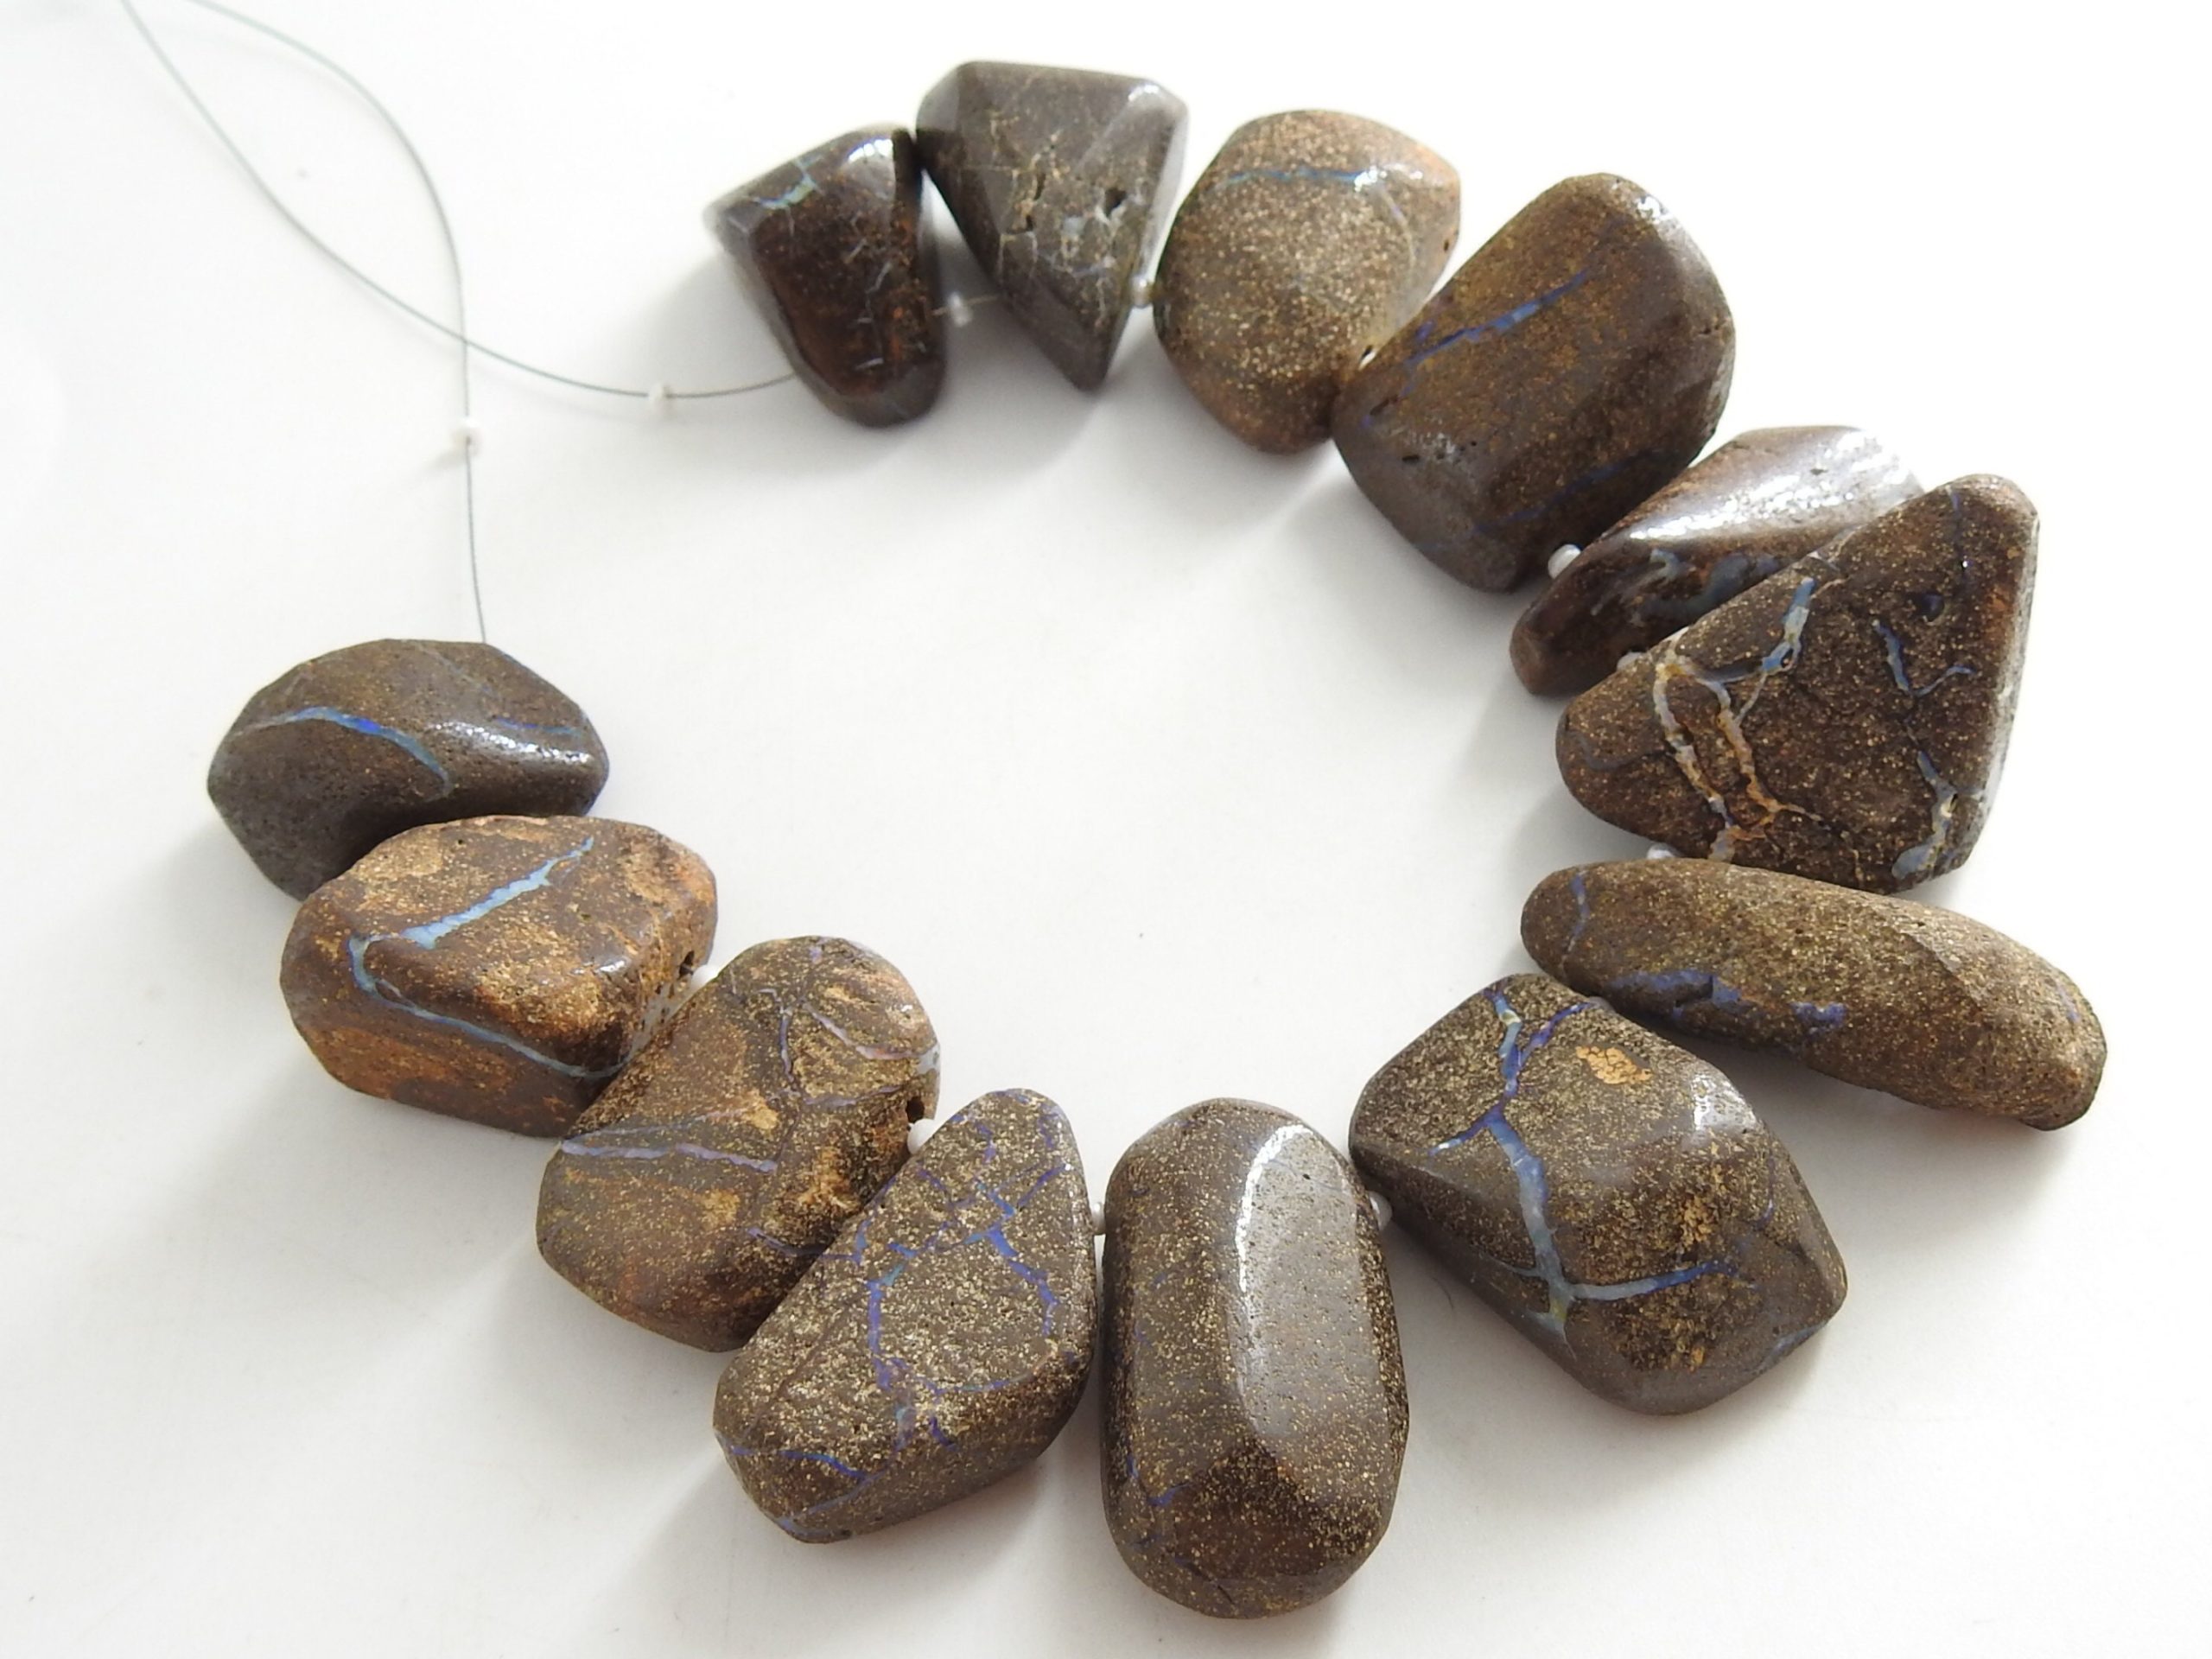 100%Natural Boulder Opal Smooth Fancy Briolette,Tumbke,Nugget,Irregular Shape Bead,Loose Stone,Minerals,Multi Fire 13Piece Strand (WM)R1 | Save 33% - Rajasthan Living 16